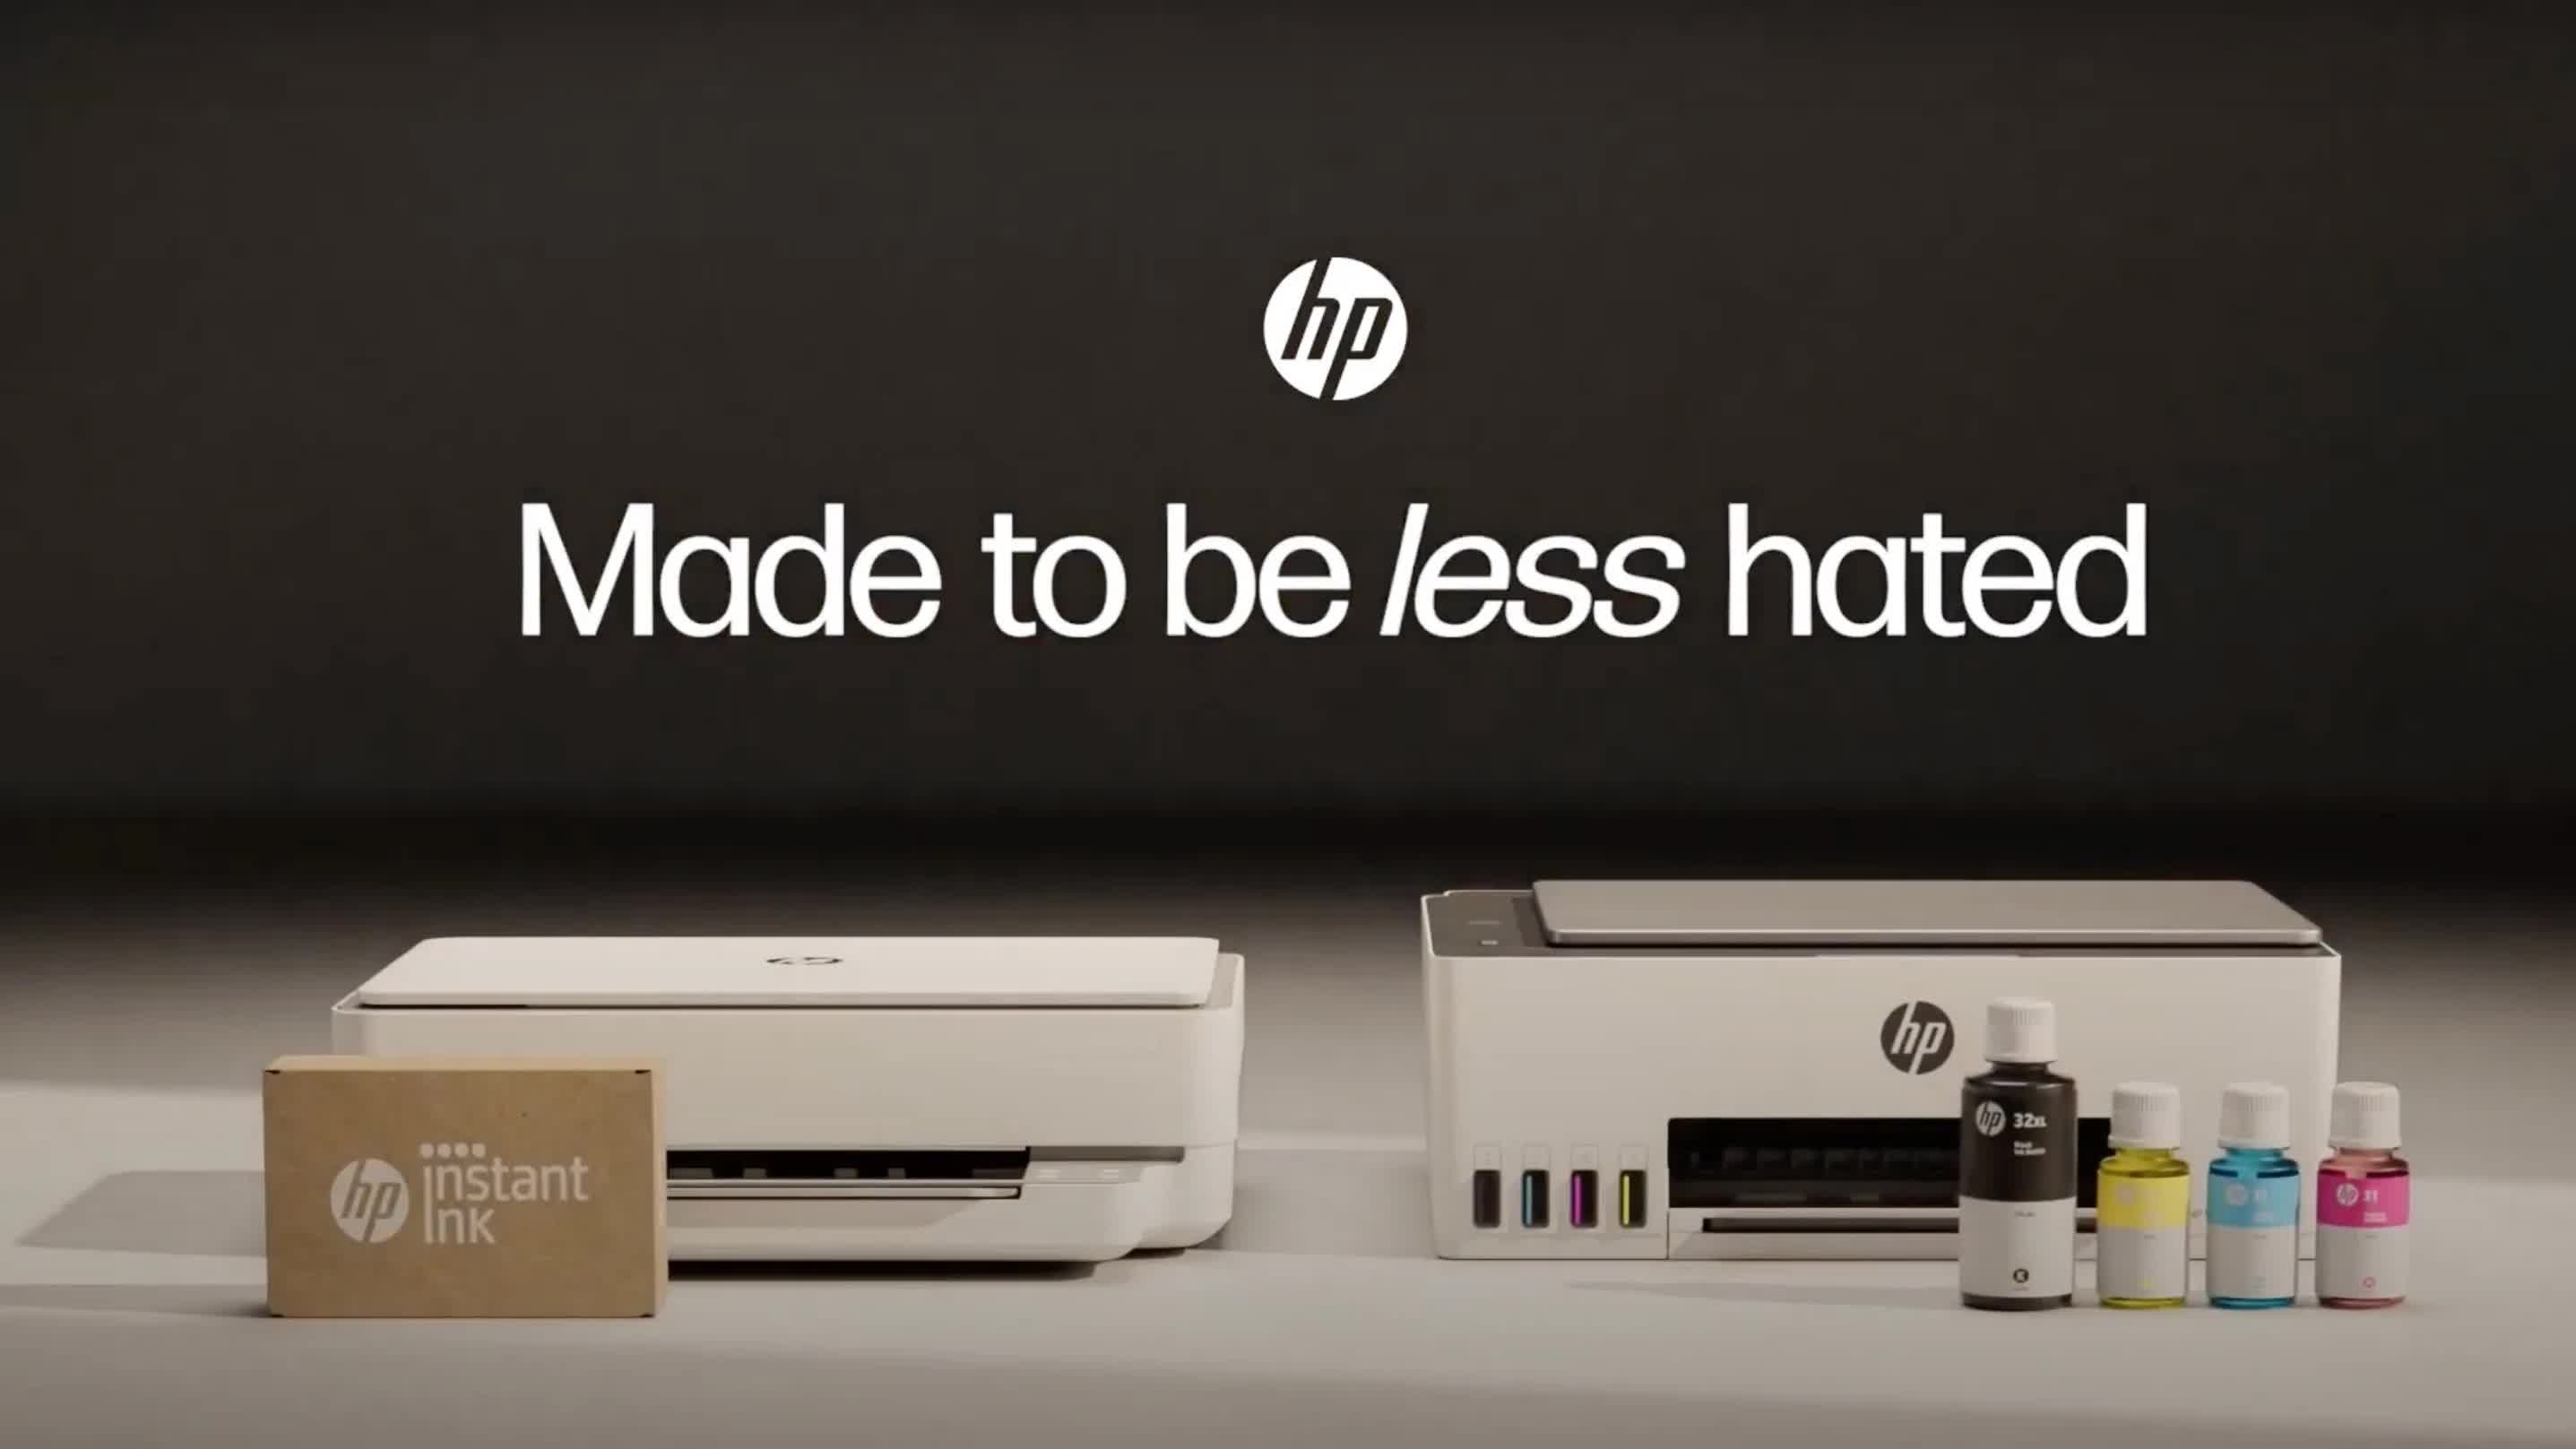 HP's TV ad campaign claims its printers are made to be less hated